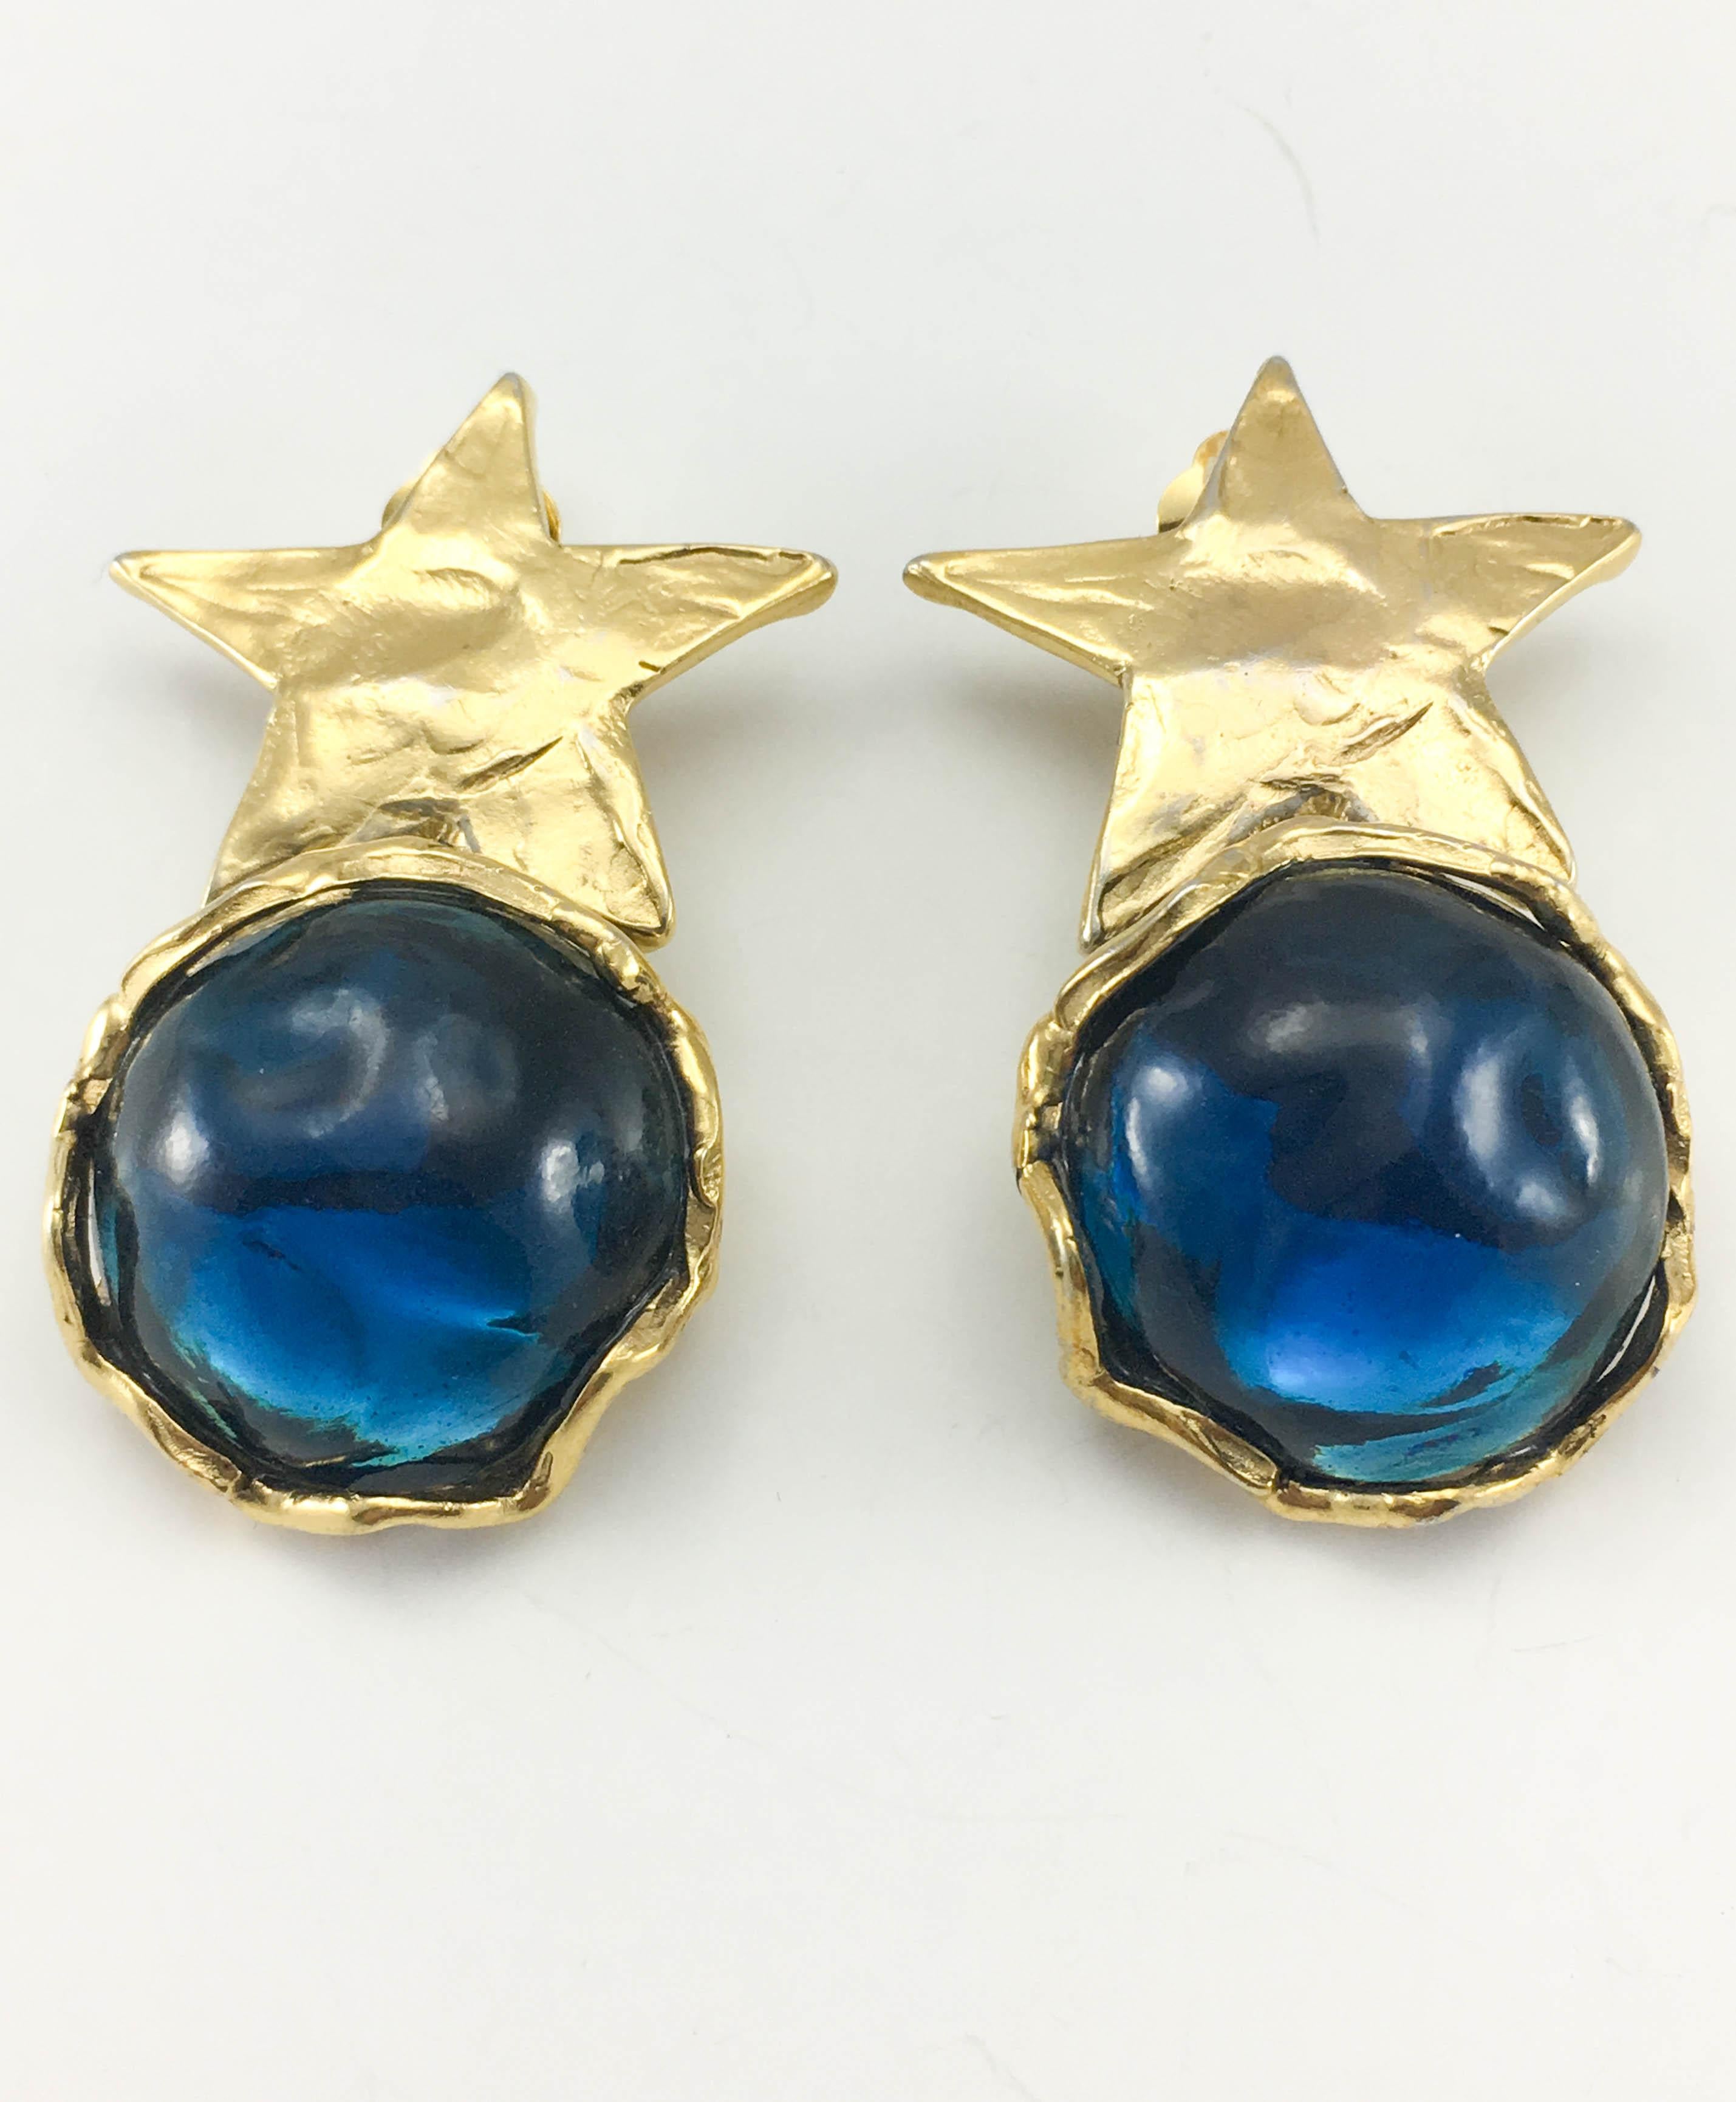 1980's Yves Saint Laurent Blue Resin and Gold-Plated Star Earrings For Sale 2